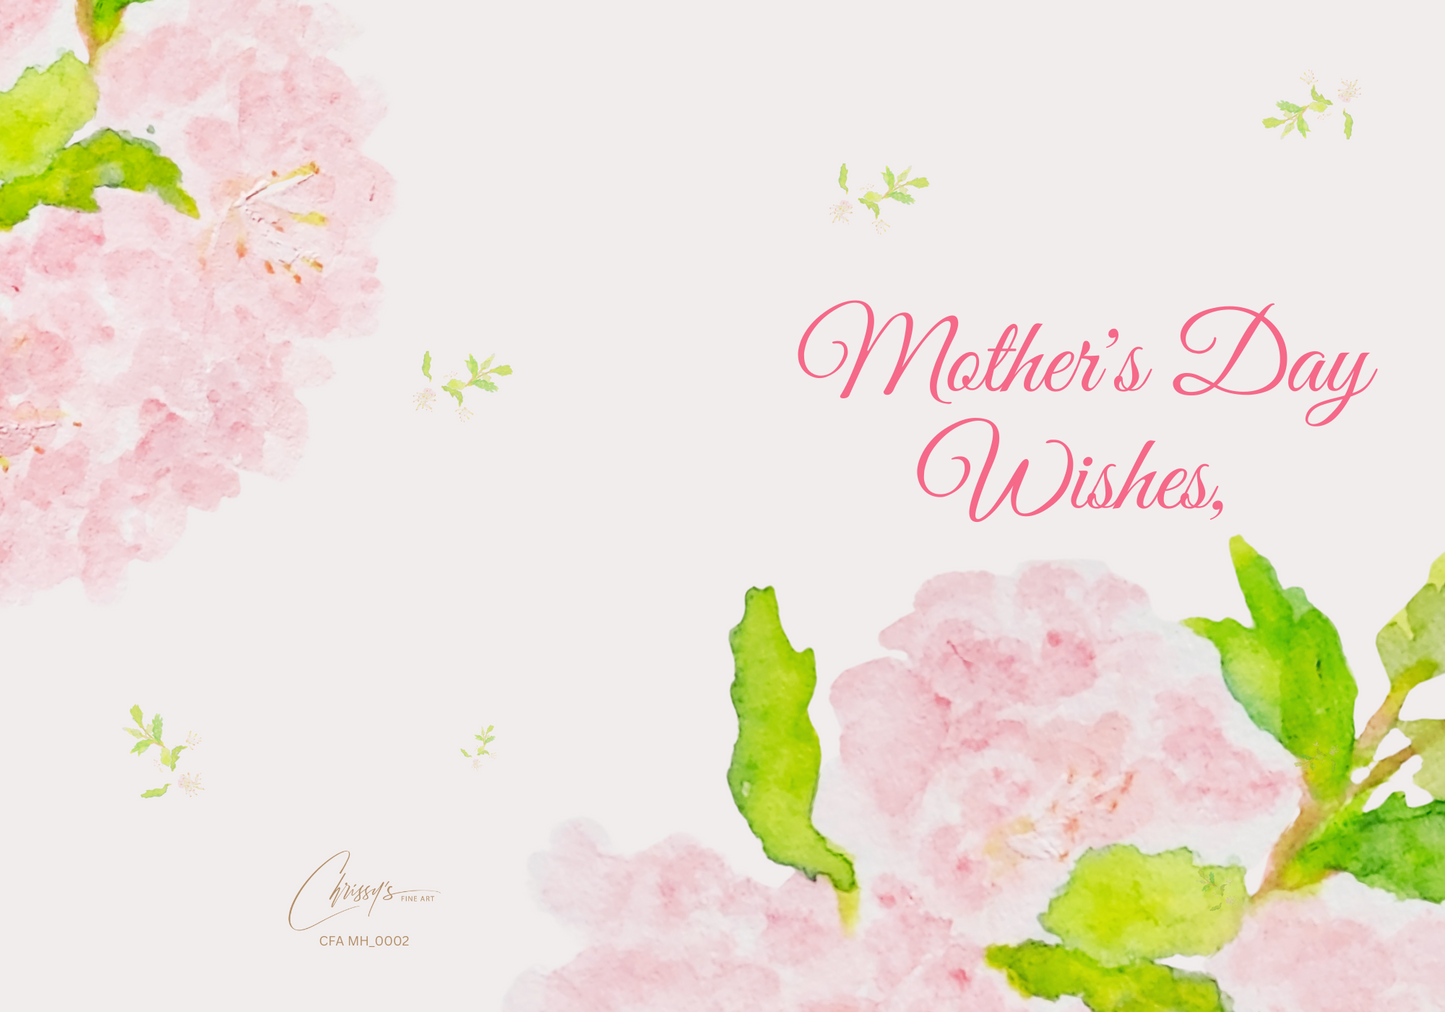 Delicate Petals! Mother's Day Greeting Card